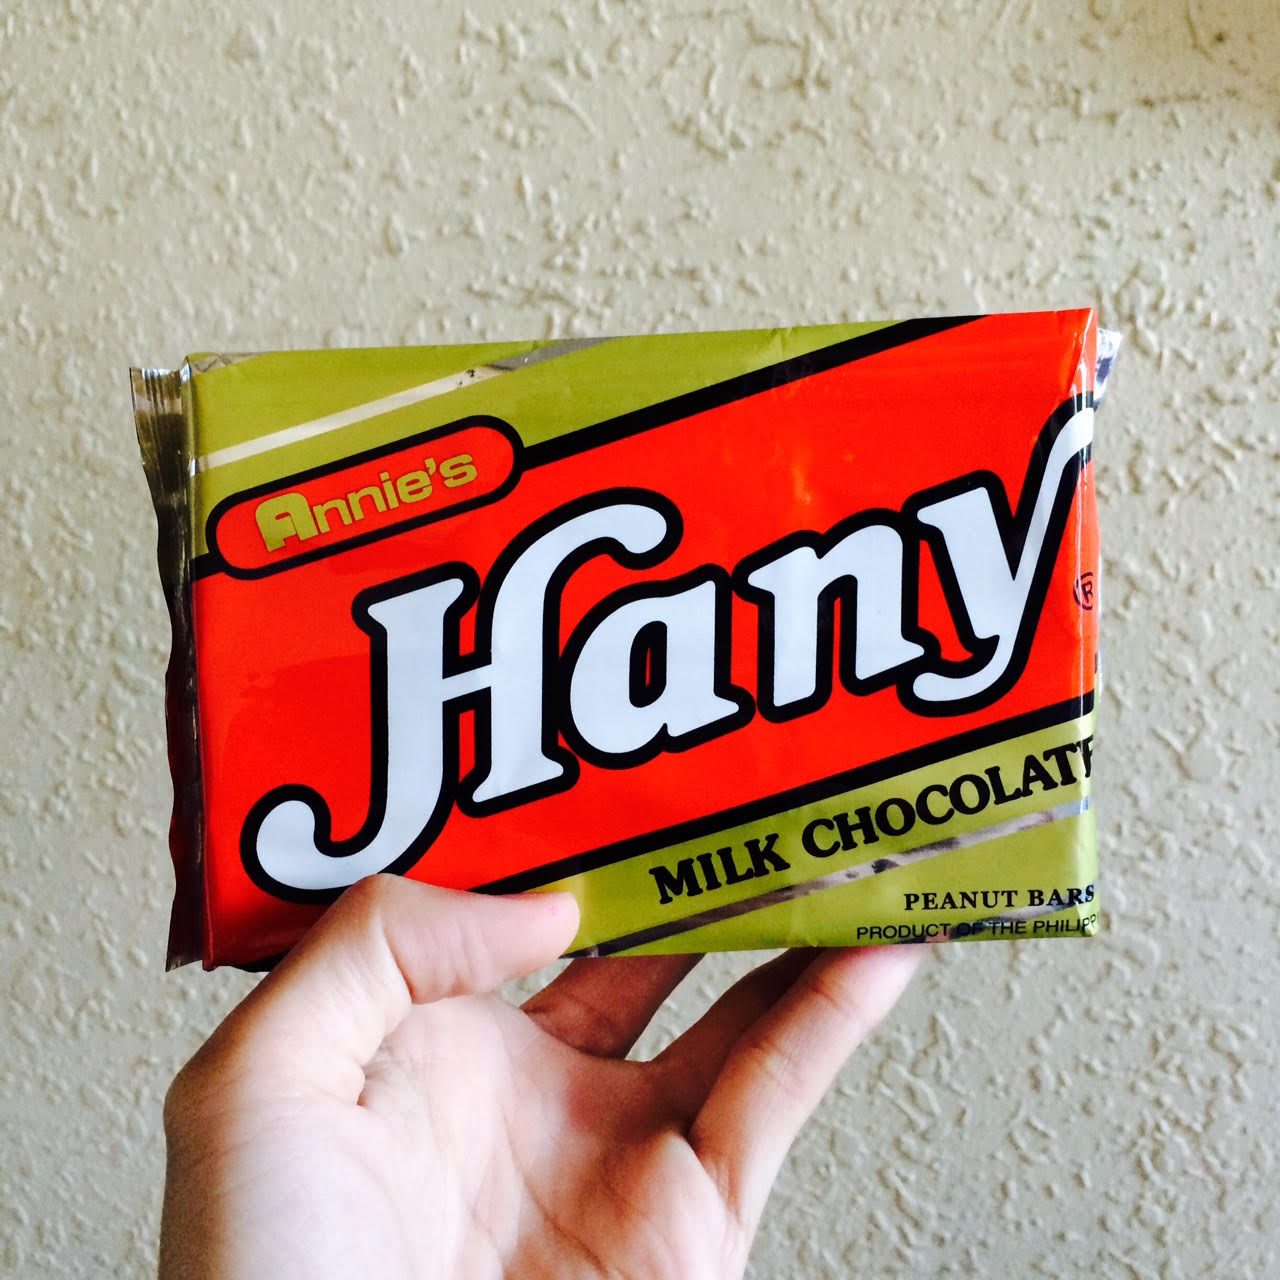 THE SAME? The question of whether King Choc Nut is now created using the same formulation as Hany’s also remains. Photo by Shadz Loresco / Rappler 